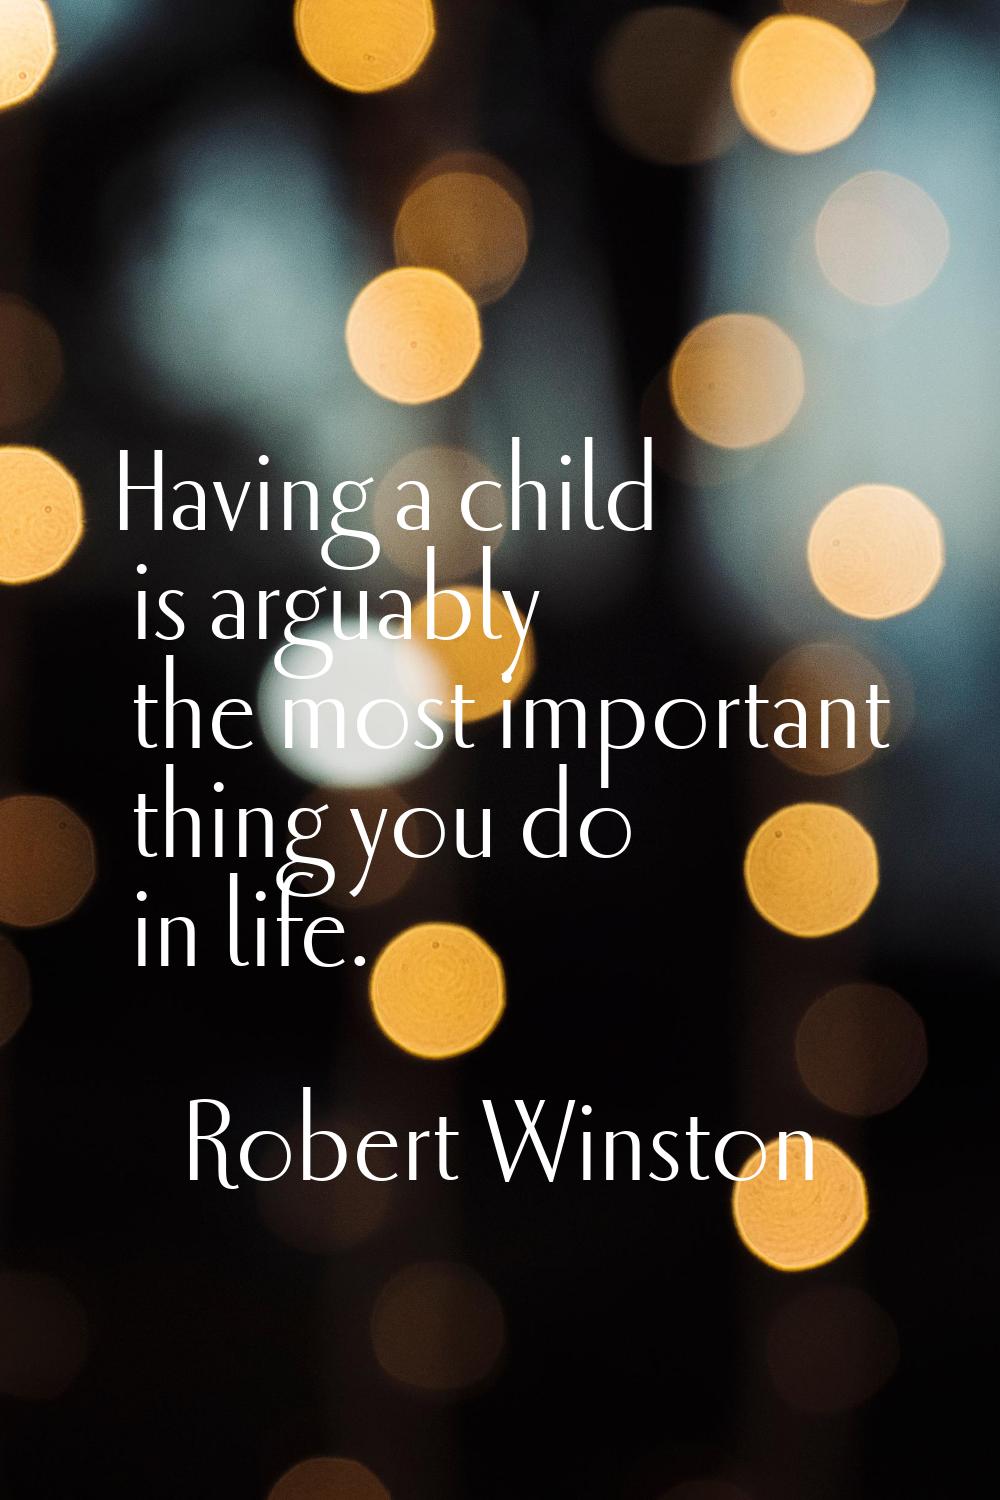 Having a child is arguably the most important thing you do in life.